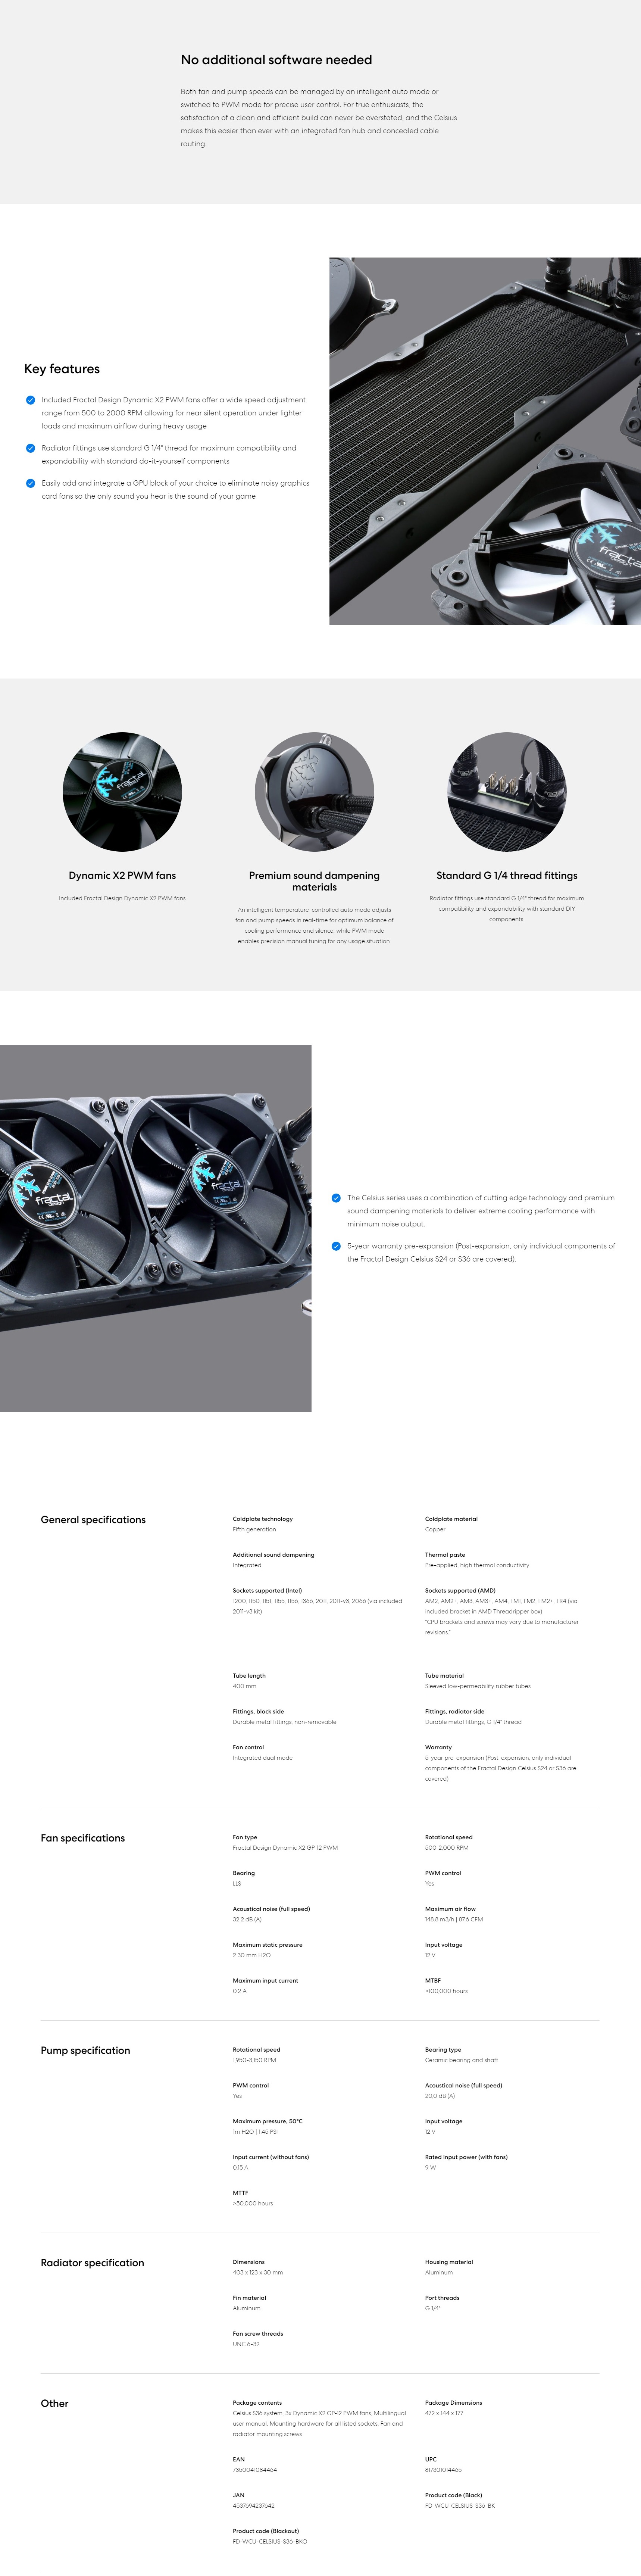 A large marketing image providing additional information about the product Fractal Design Celsius S36 360mm AIO CPU Cooler - Blackout - Additional alt info not provided